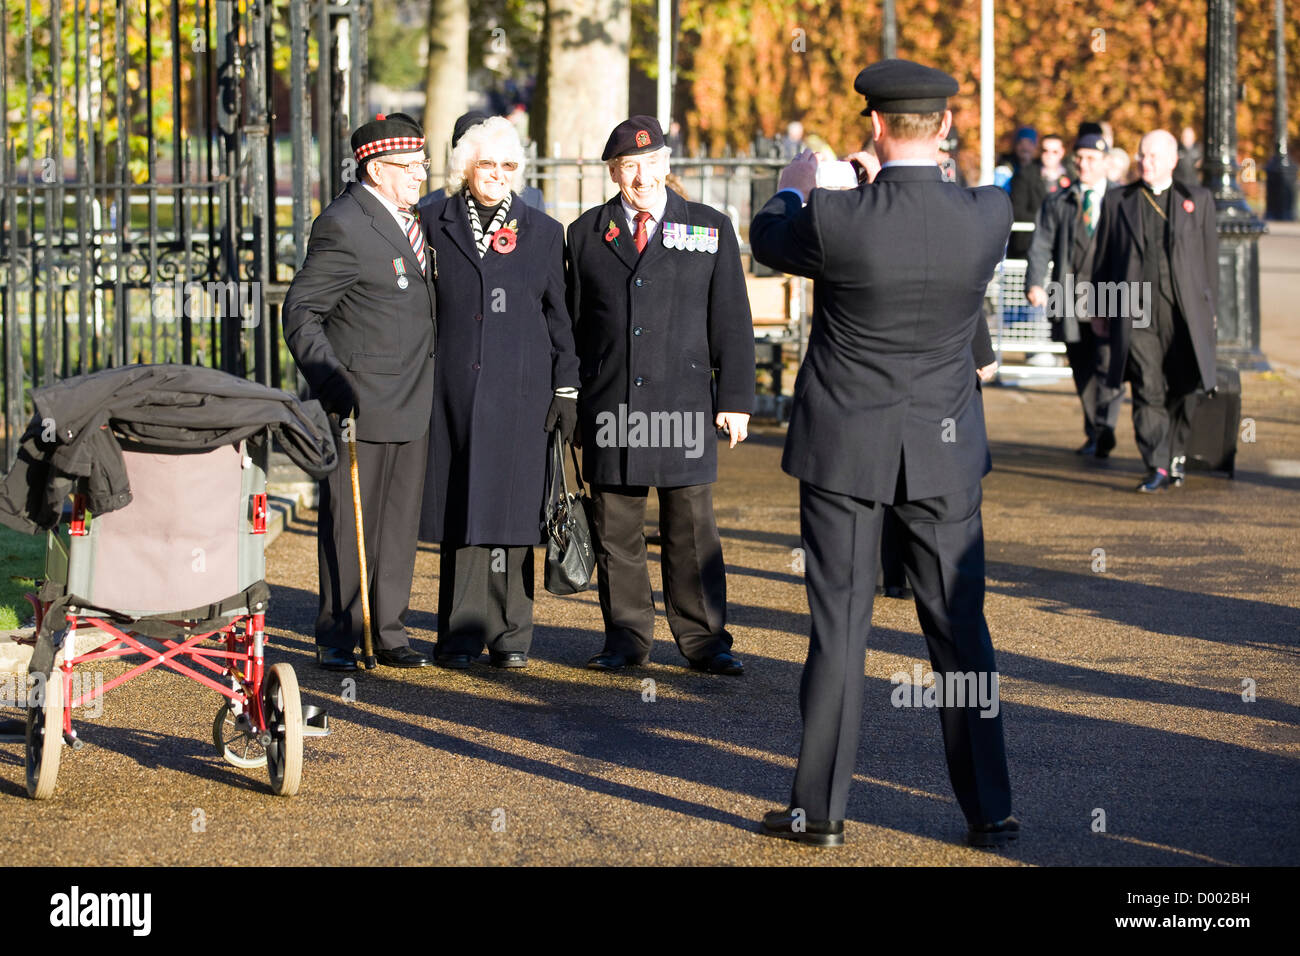 The men and women of Remembrance Sunday in and around whitehall London 2012  Poppy Day Stock Photo